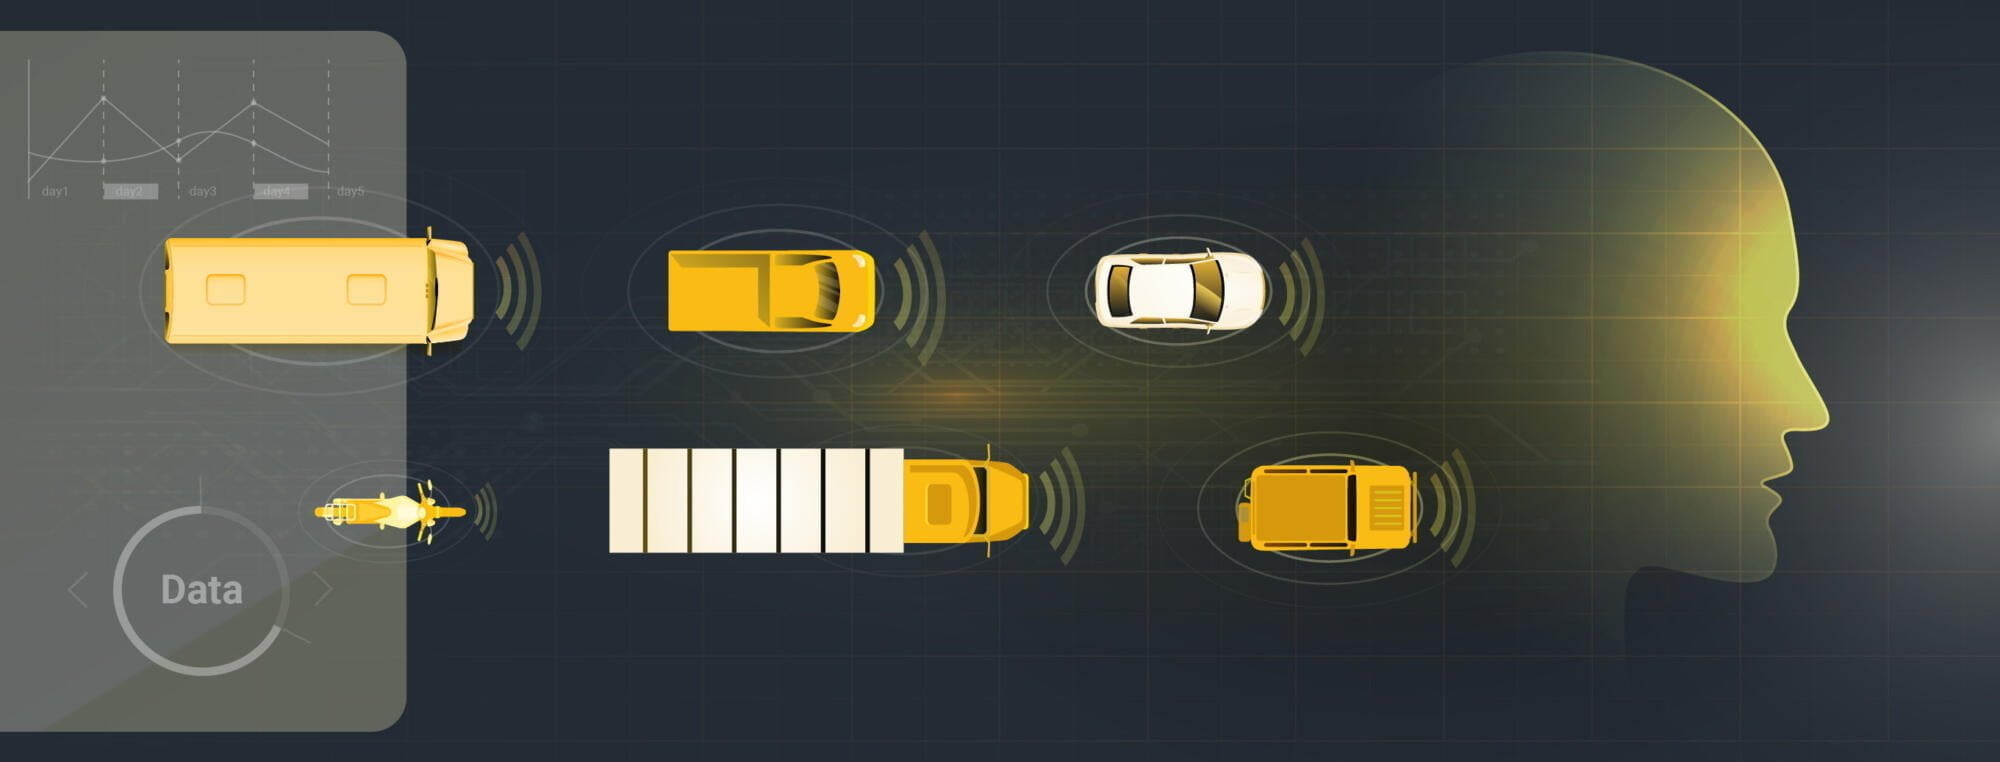 PaSCAL’s 15-minute survey on city readiness for connected and autonomous vehicles